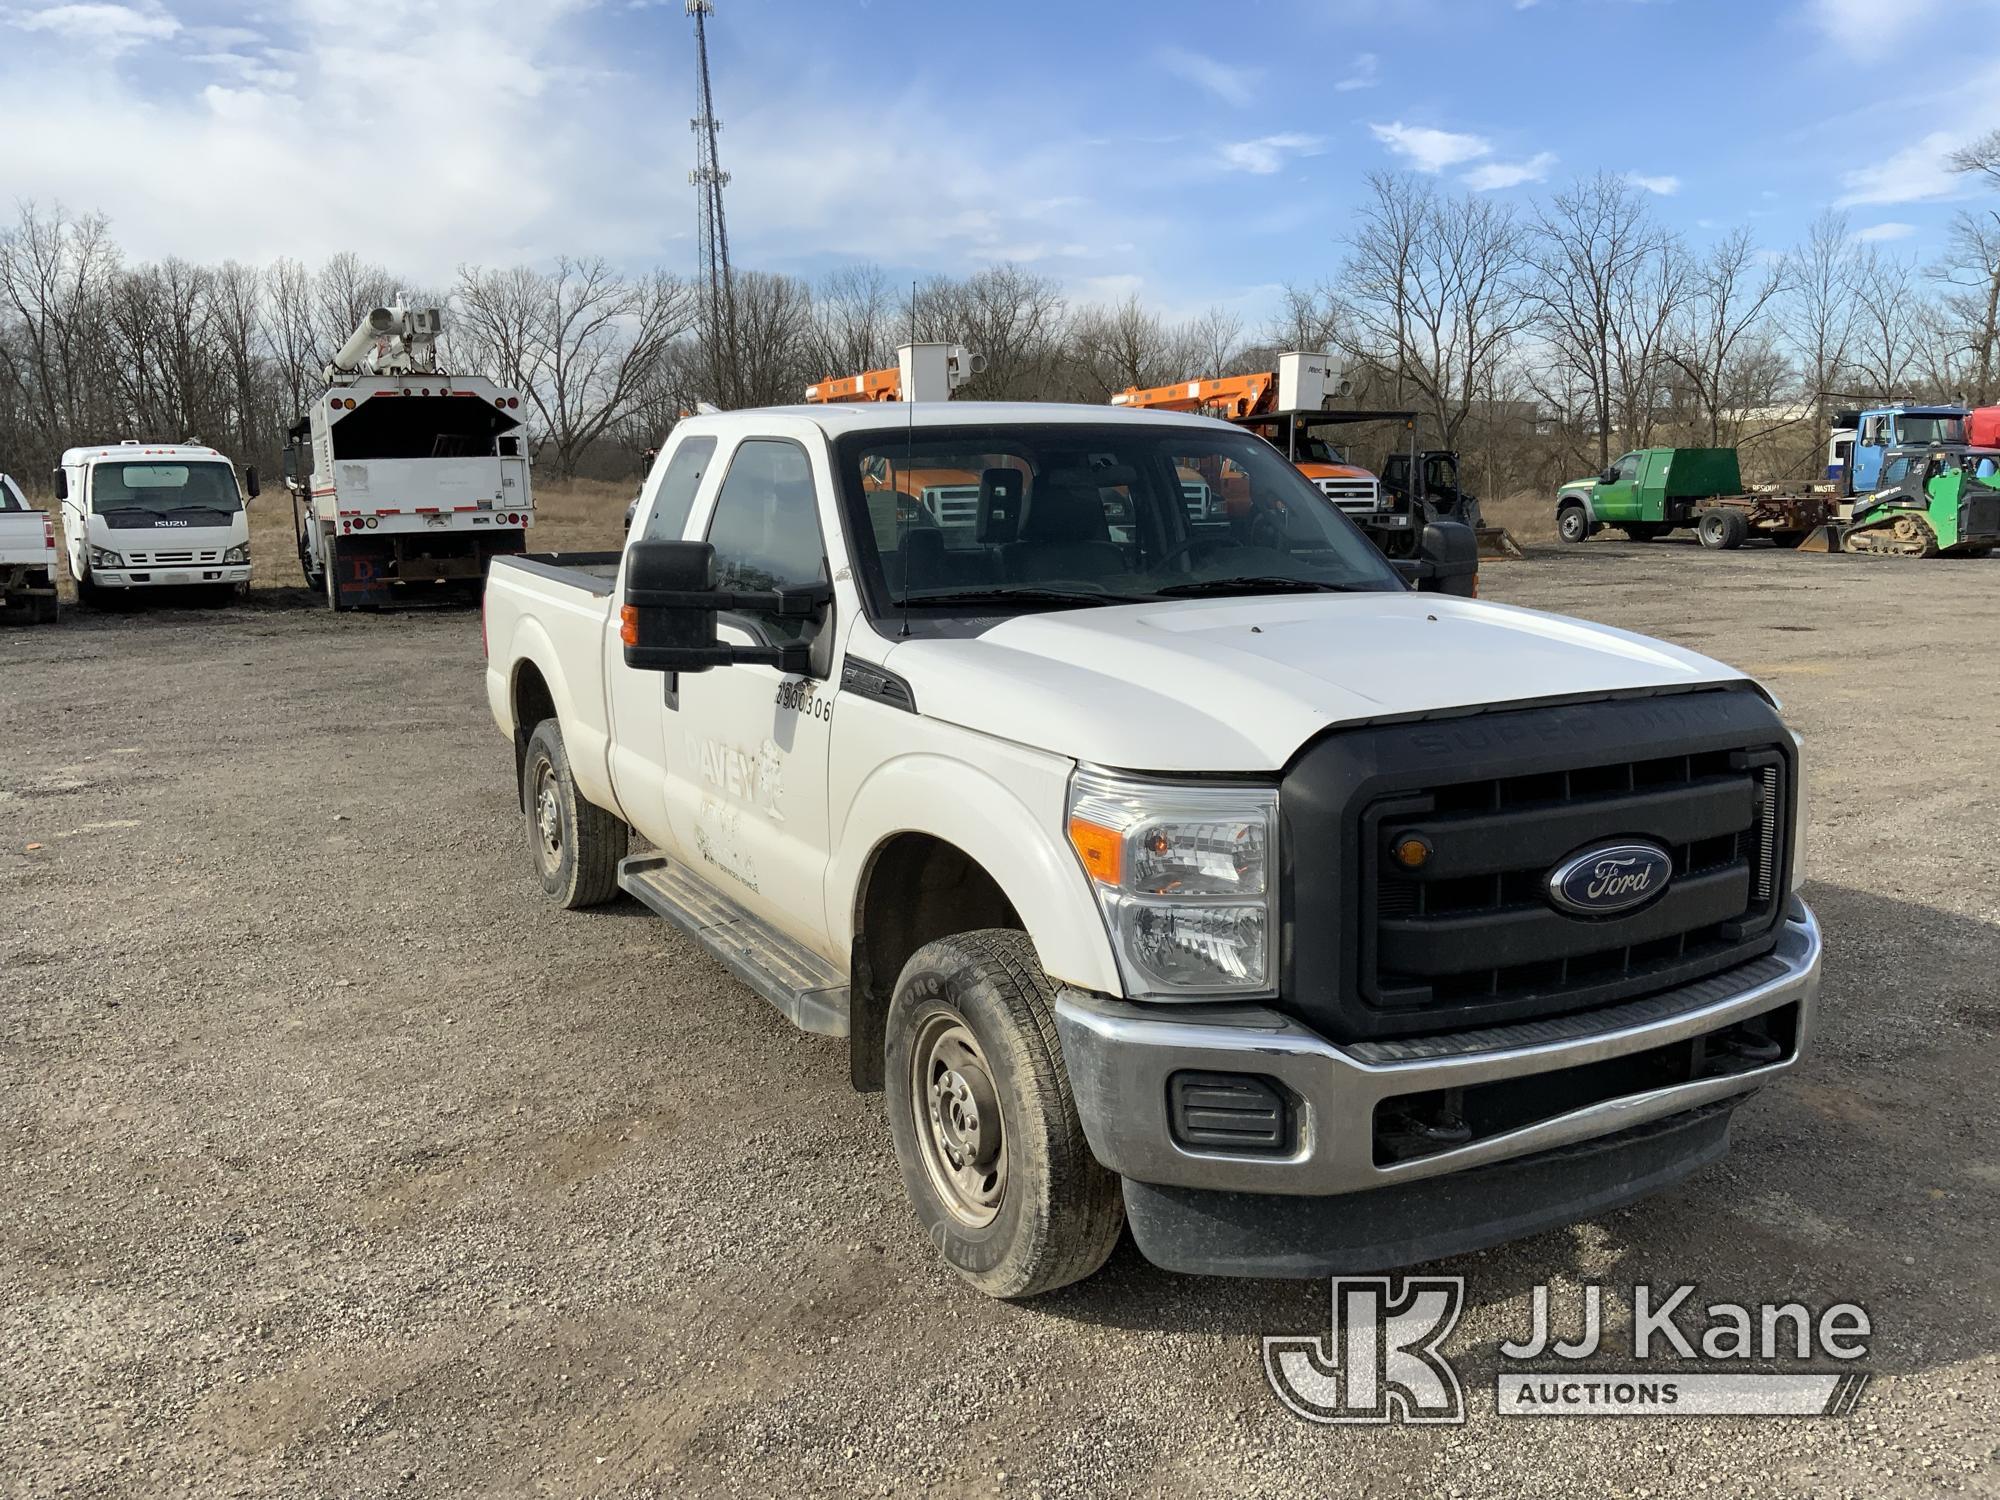 (Ashland, OH) 2016 Ford F250 4x4 Extended-Cab Pickup Truck Runs) (Will Not Move, Bad Transmission) (